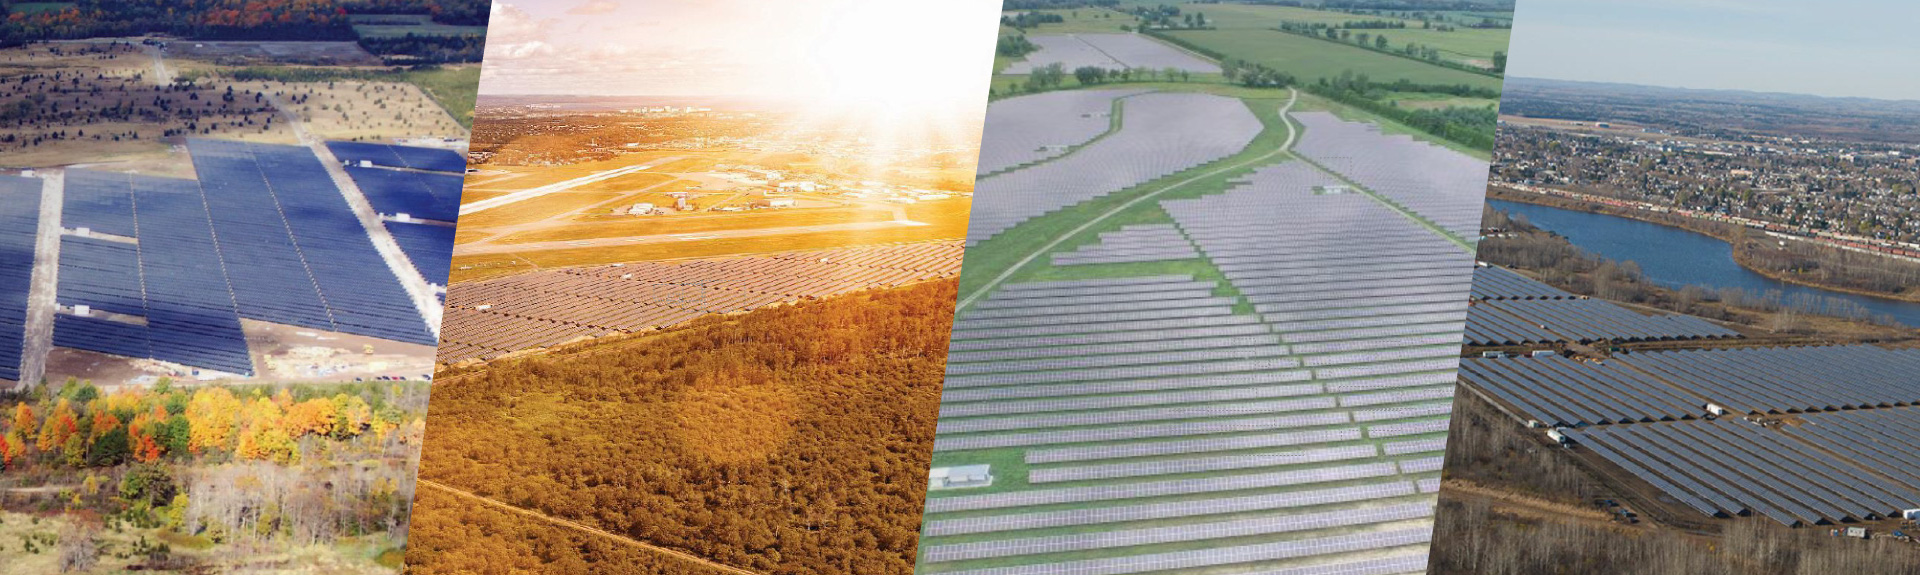 Overhead view of a field of solar panel installations in Ontario.